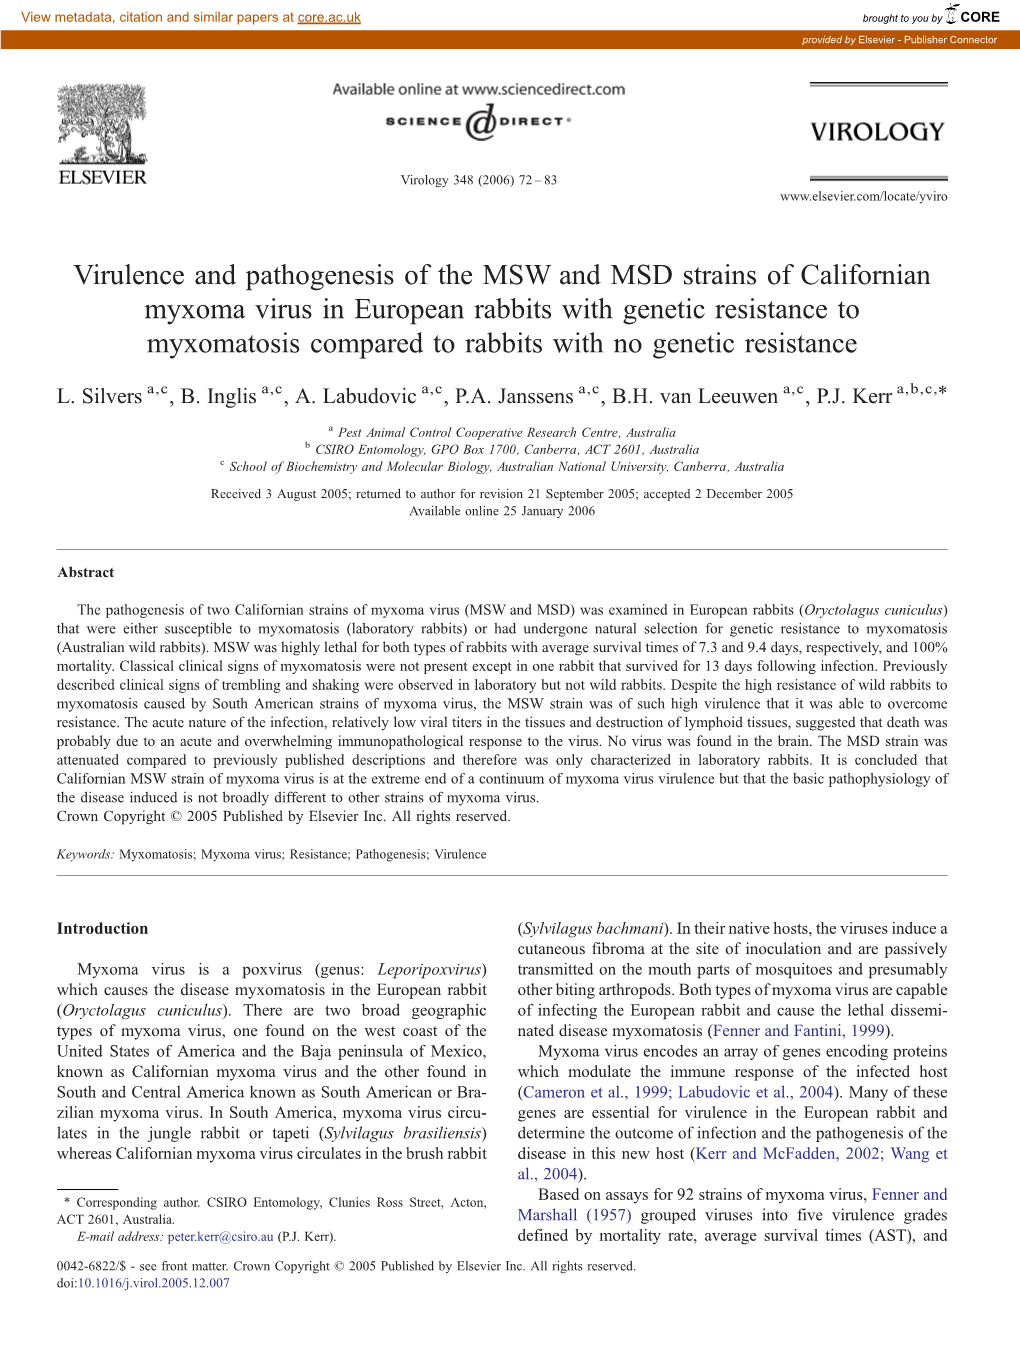 Virulence and Pathogenesis of the MSW and MSD Strains Of